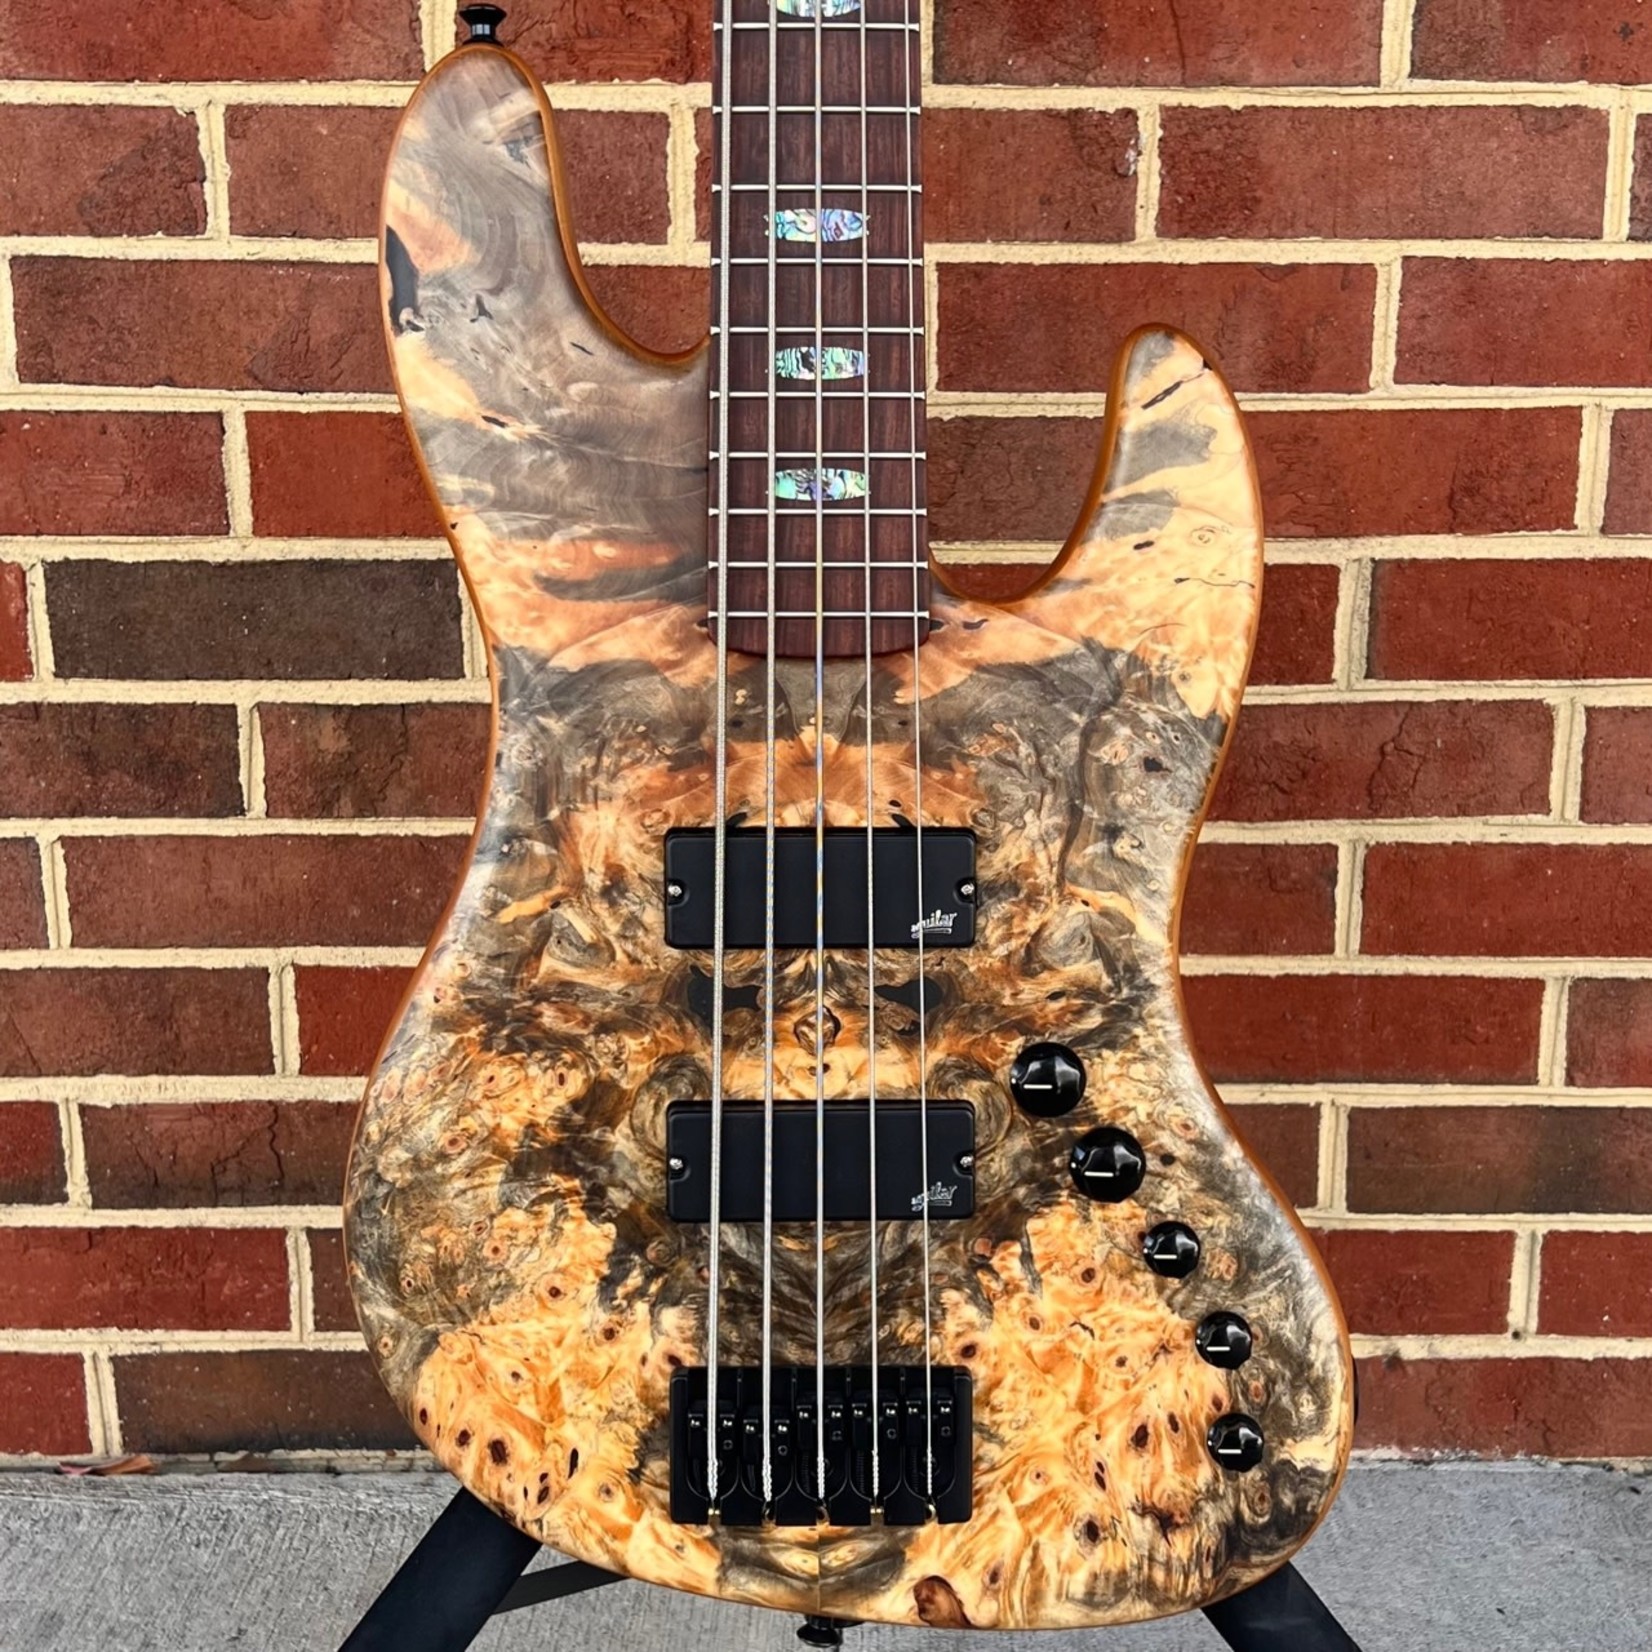 Spector Spector USA Coda5 DLX XL, 35" Scale Length, Buckeye Burl Top, Swamp Ash Body, Roasted Maple Neck, Pau Ferro Fretboard, Abalone Crown Inlays, Aguilar DCB-G4 Pickups, Aguilar OBP-3 Preamp, Black Hardware, Spector Protec Deluxe Gig Bag